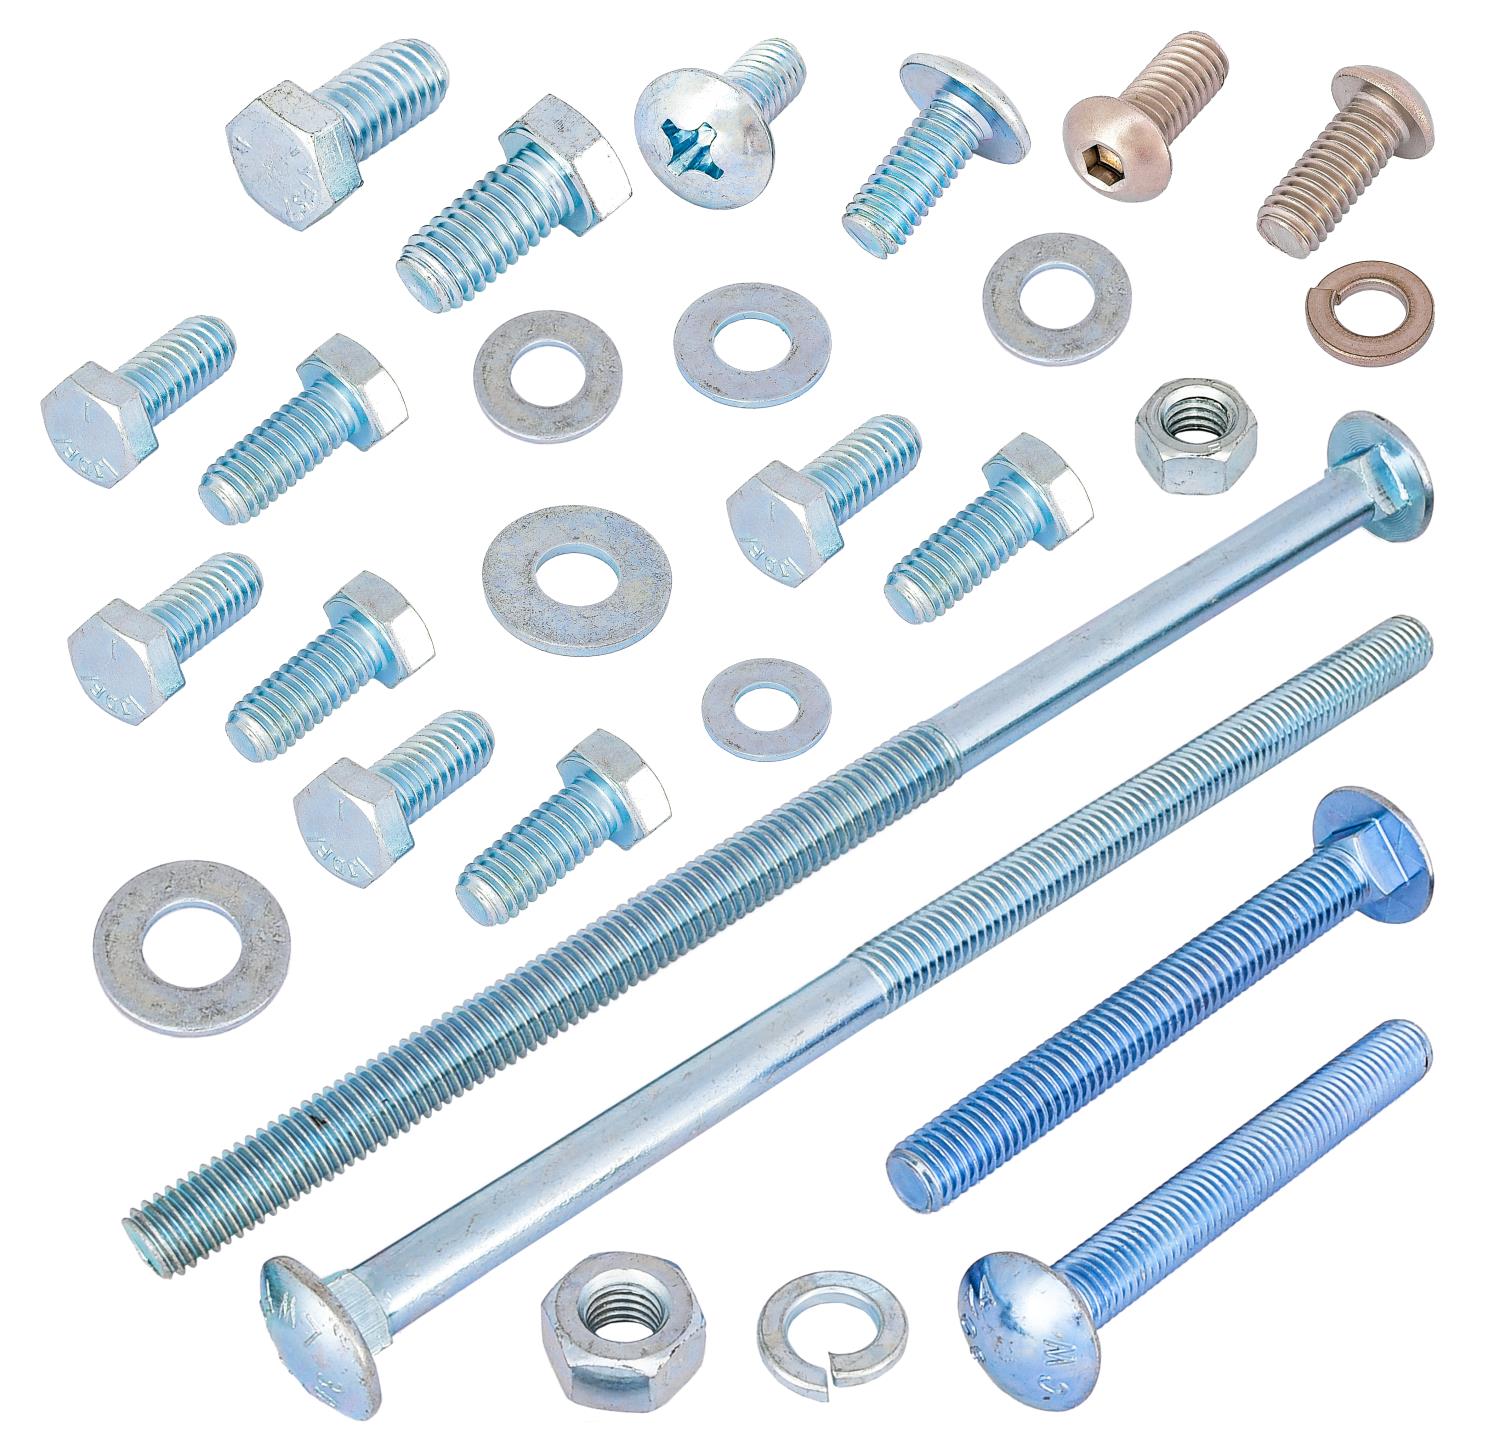 Truck Bed Assembly & Frame Mounting Fastener Kit for 1973-1987 Chevrolet, GMC C/K Series Pickups [Zinc-Plated]